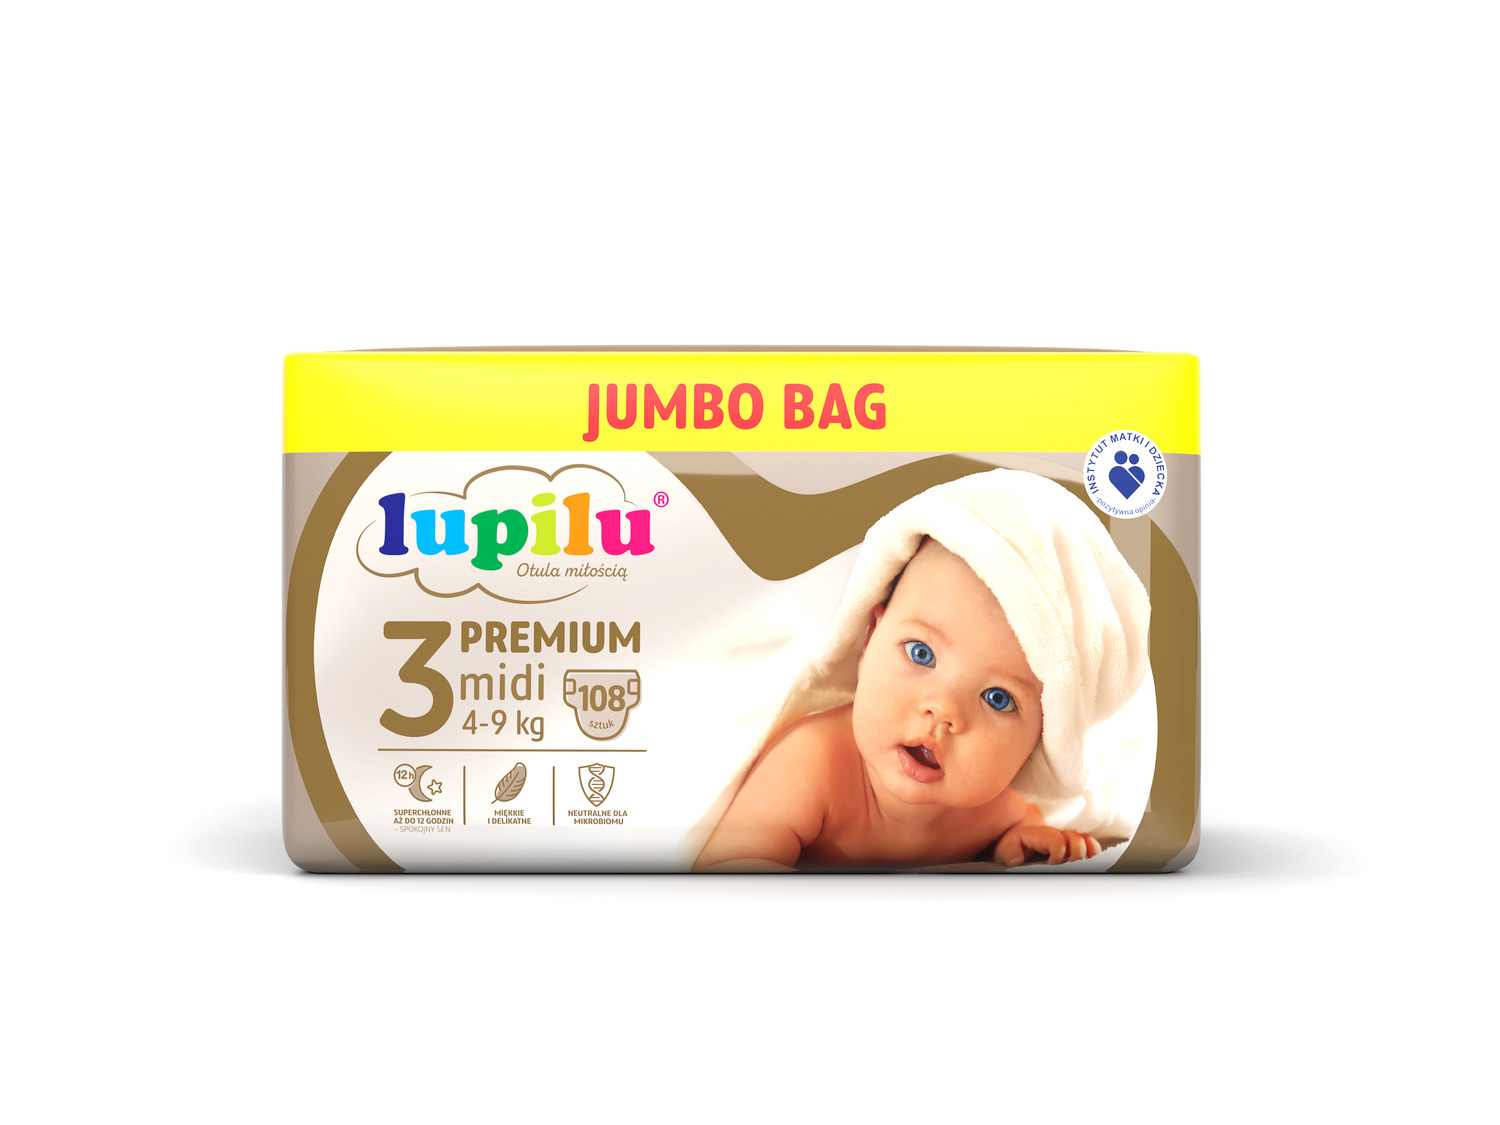 pampers pure 5